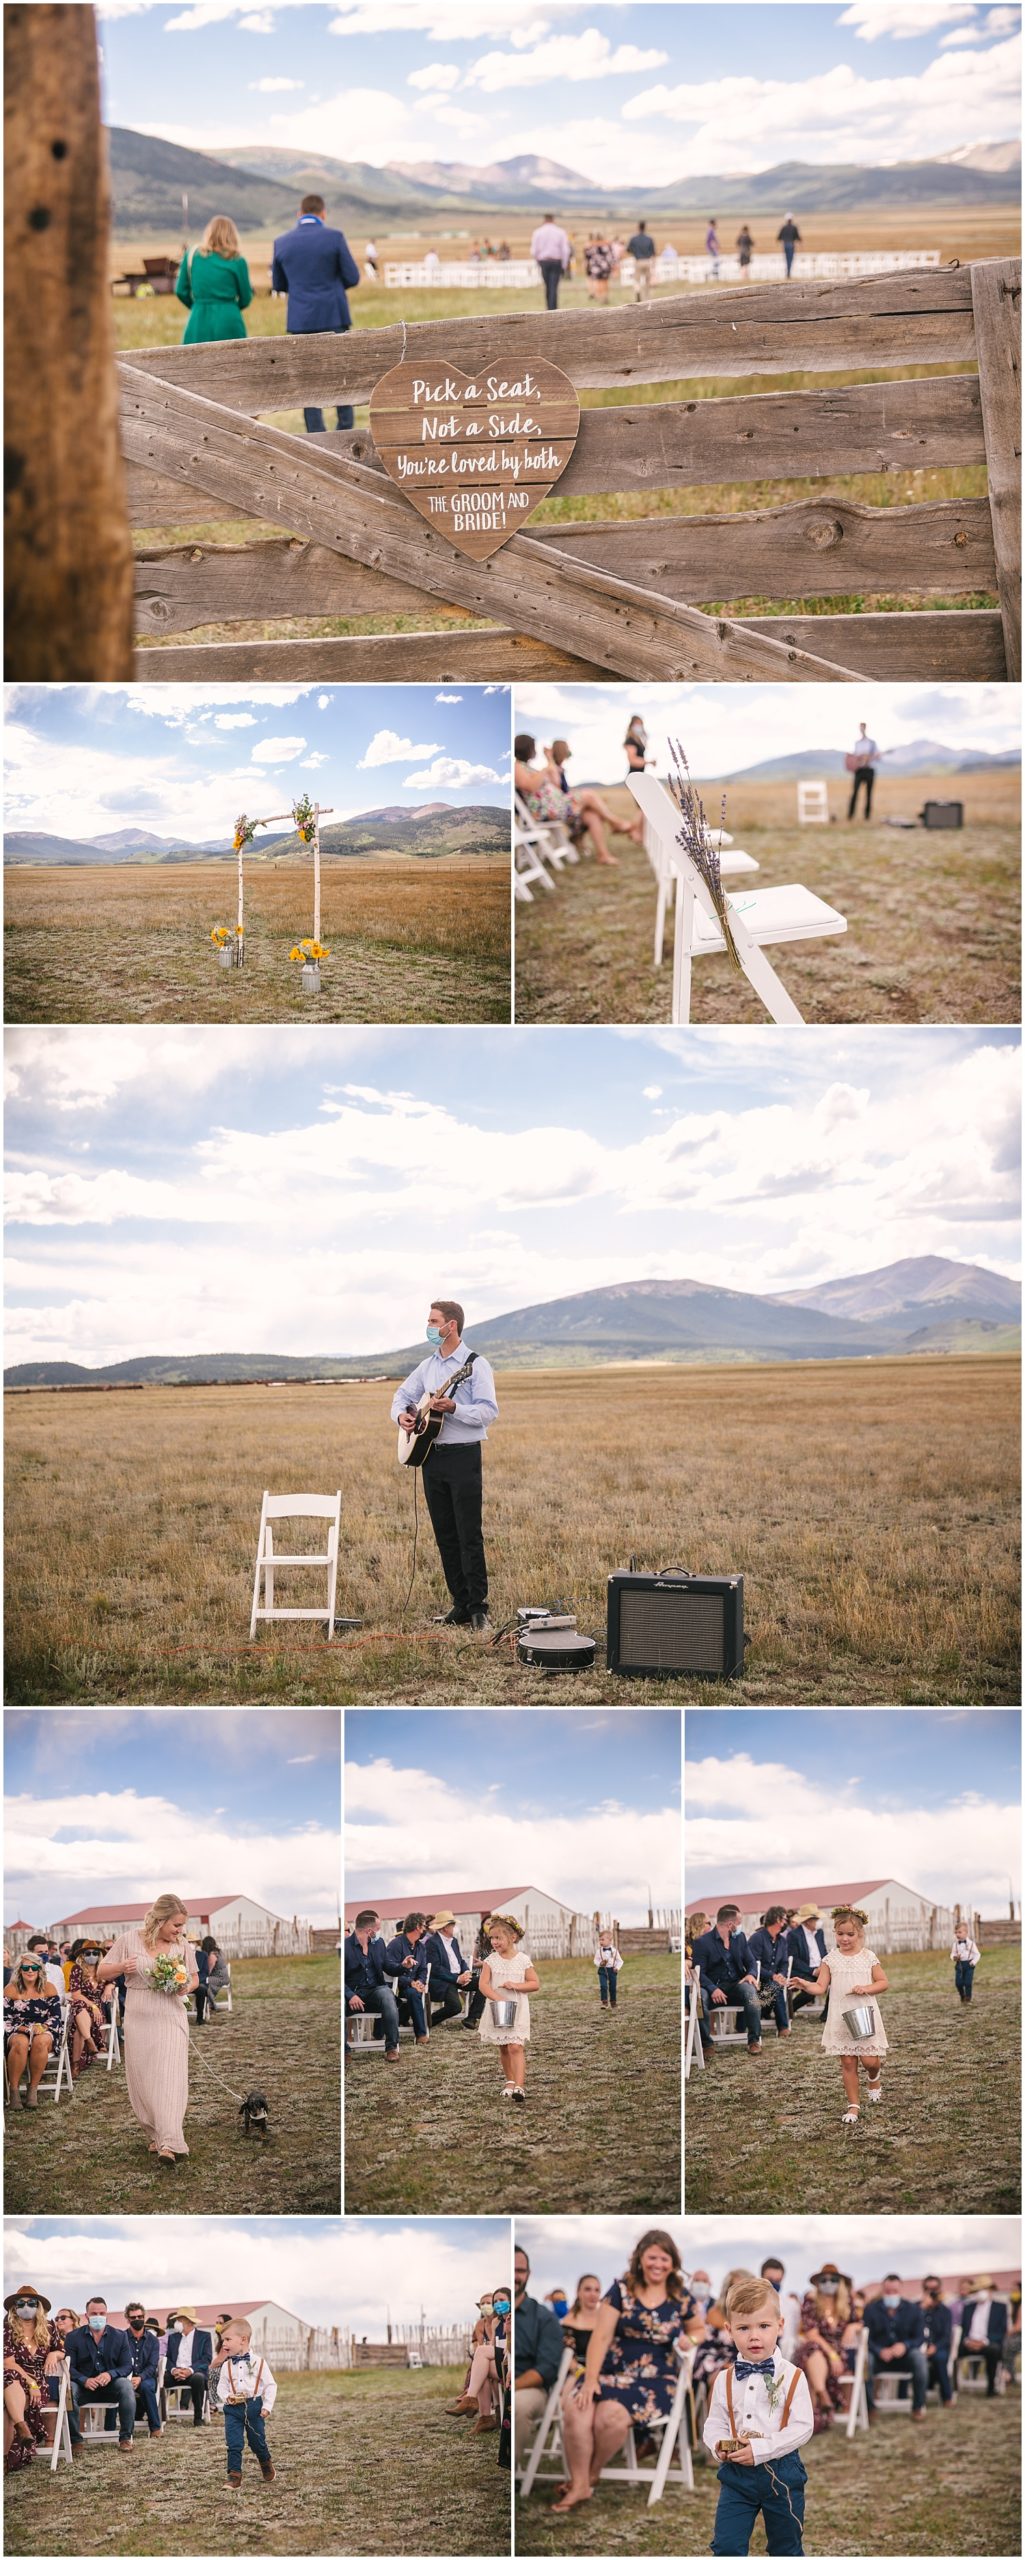 Guyton Ranch wedding ceremony in a field overlooking mountains near Fairplay Colorado